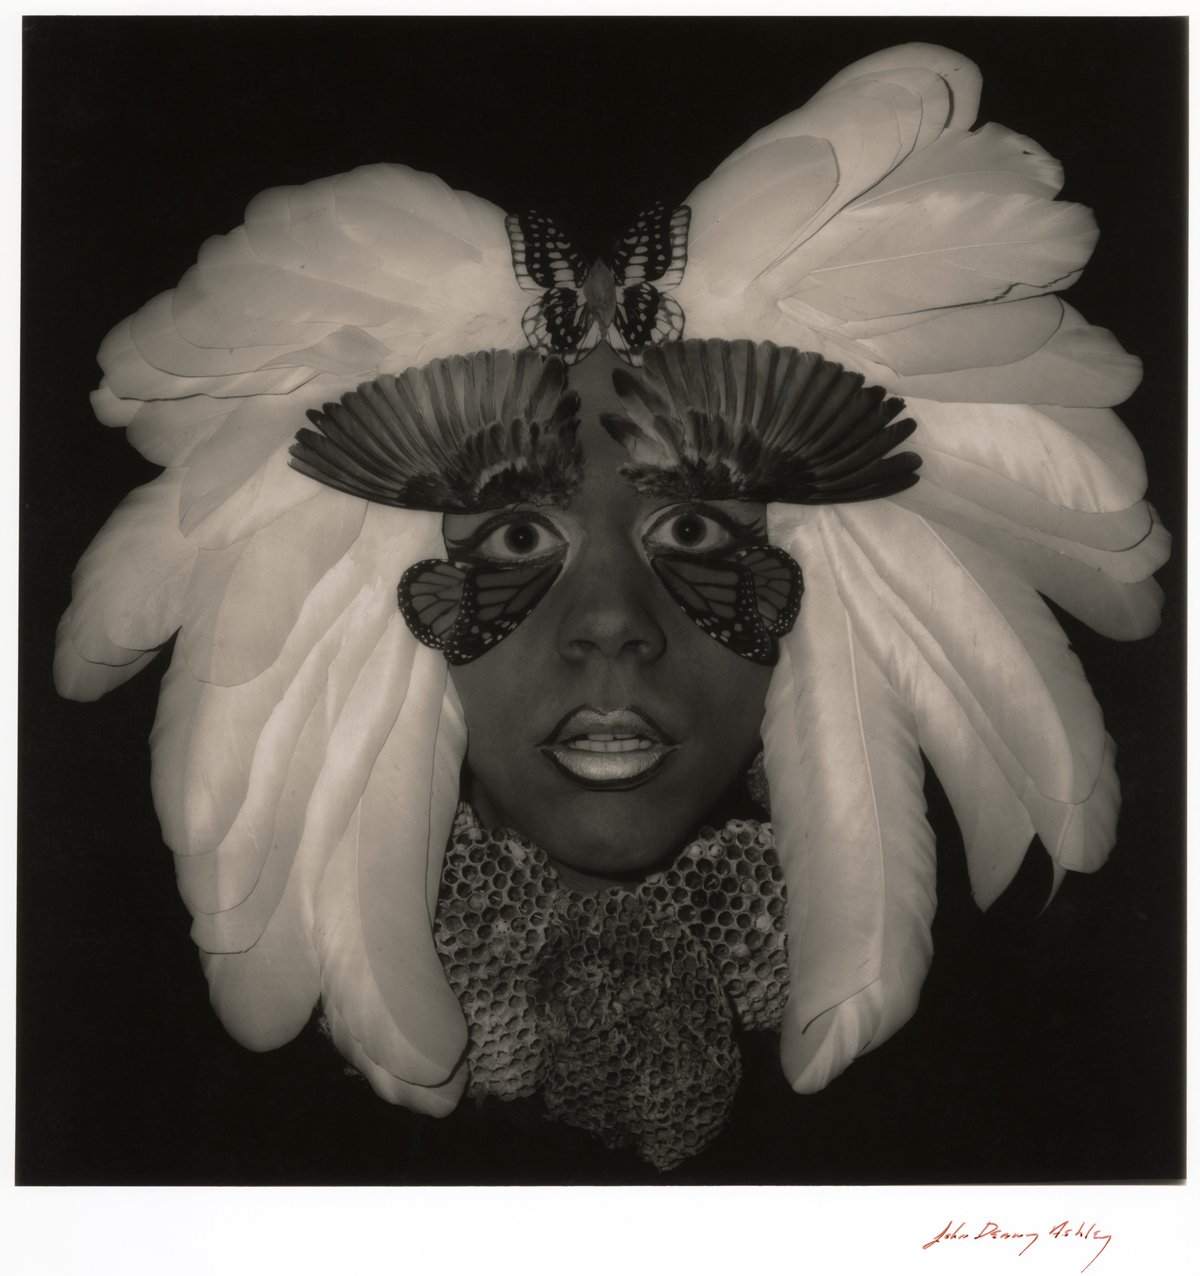 black and white head shot of a man wearing elaborate makeup and a feather headdress